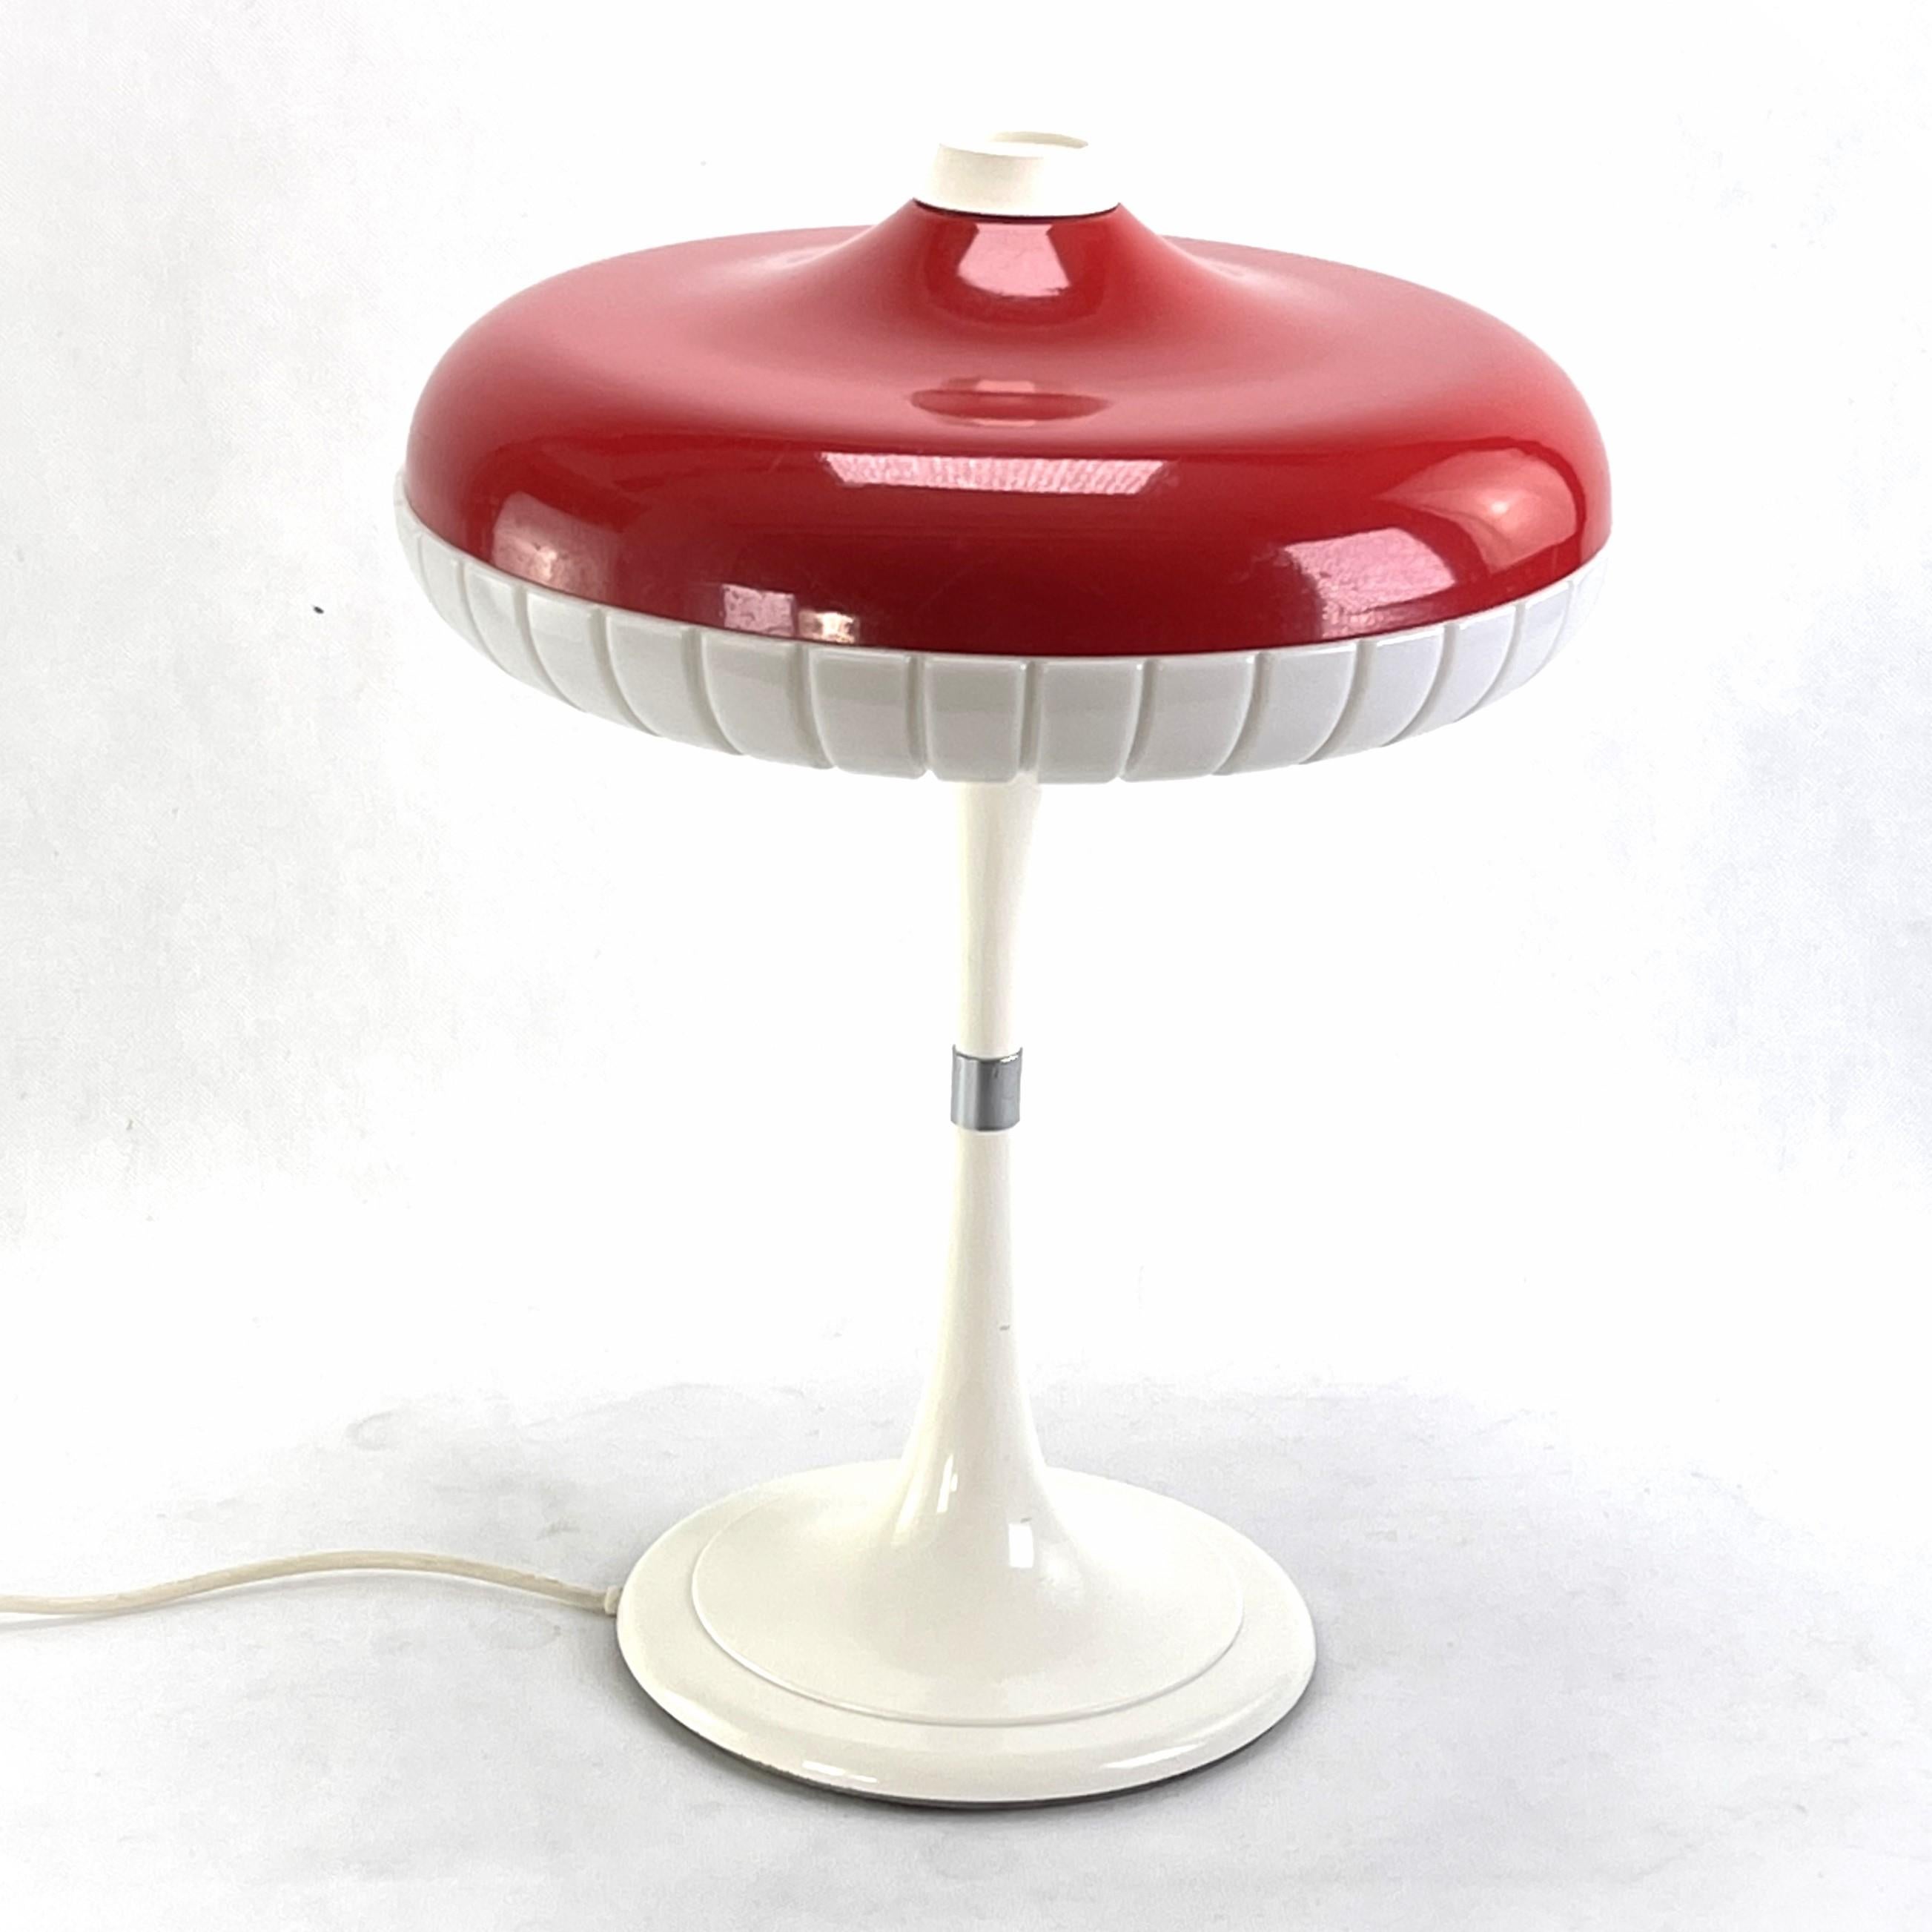 Table lamp from Siemens - 1960s.

This red and white desk lamp was produced in the midcentury by Siemens in Germany. It has a typical Space Age design and is a highlight for every stylish lounge interior. The weight of the lamp is 5.35 kg and the